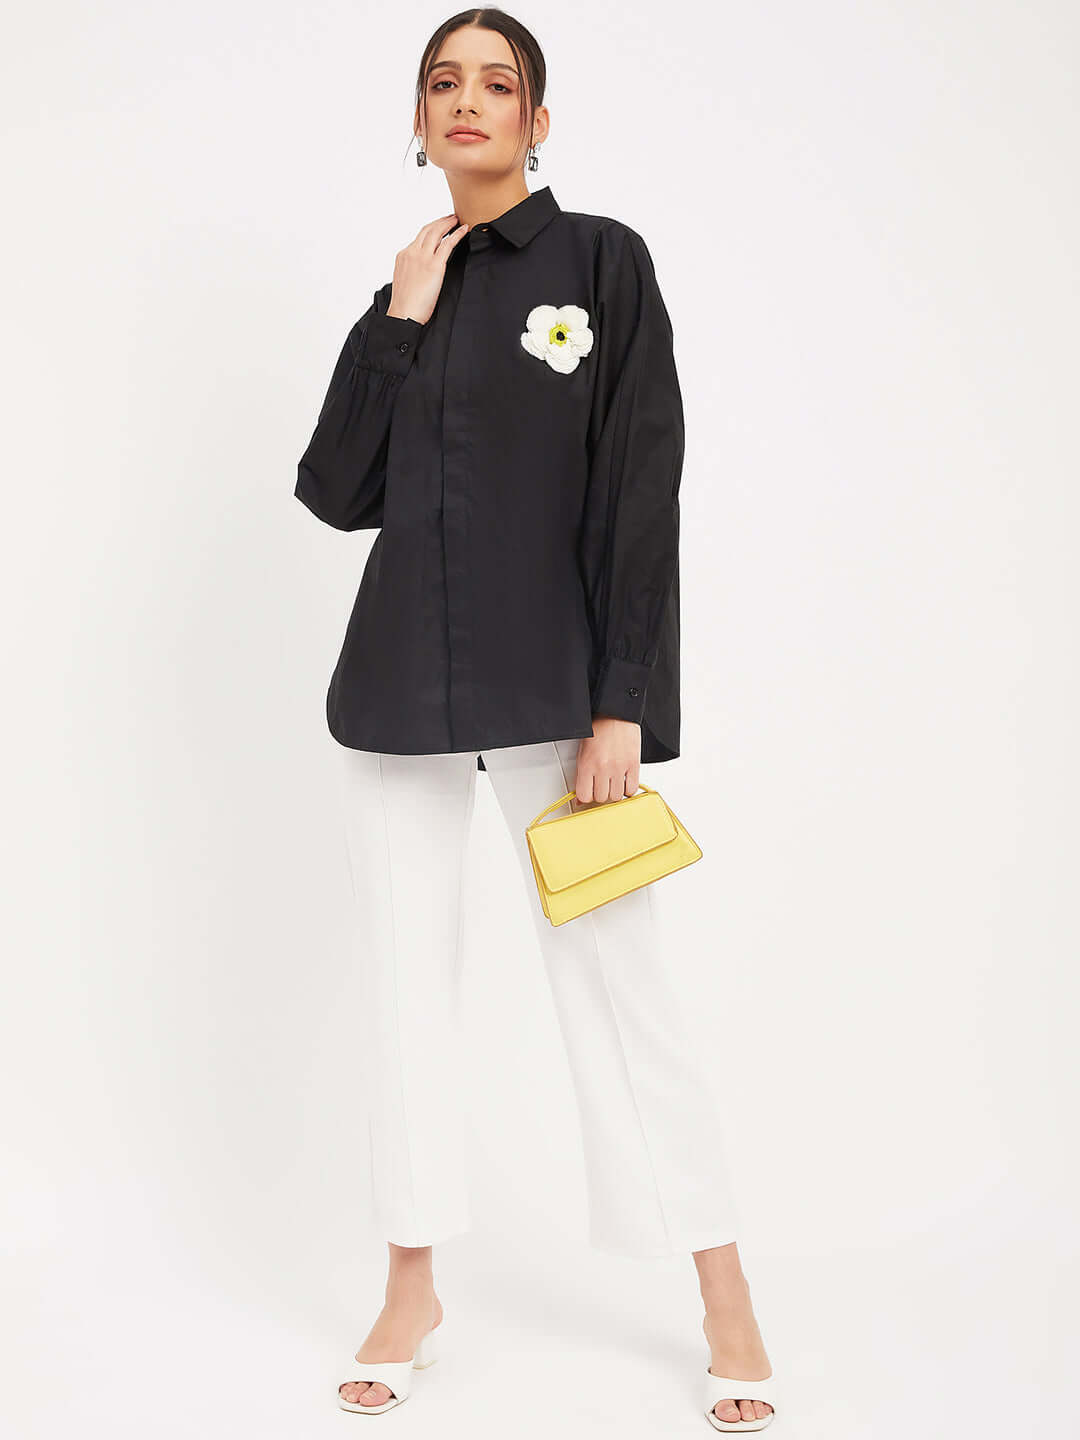 Cotton Solid Black Embroidery Shirt